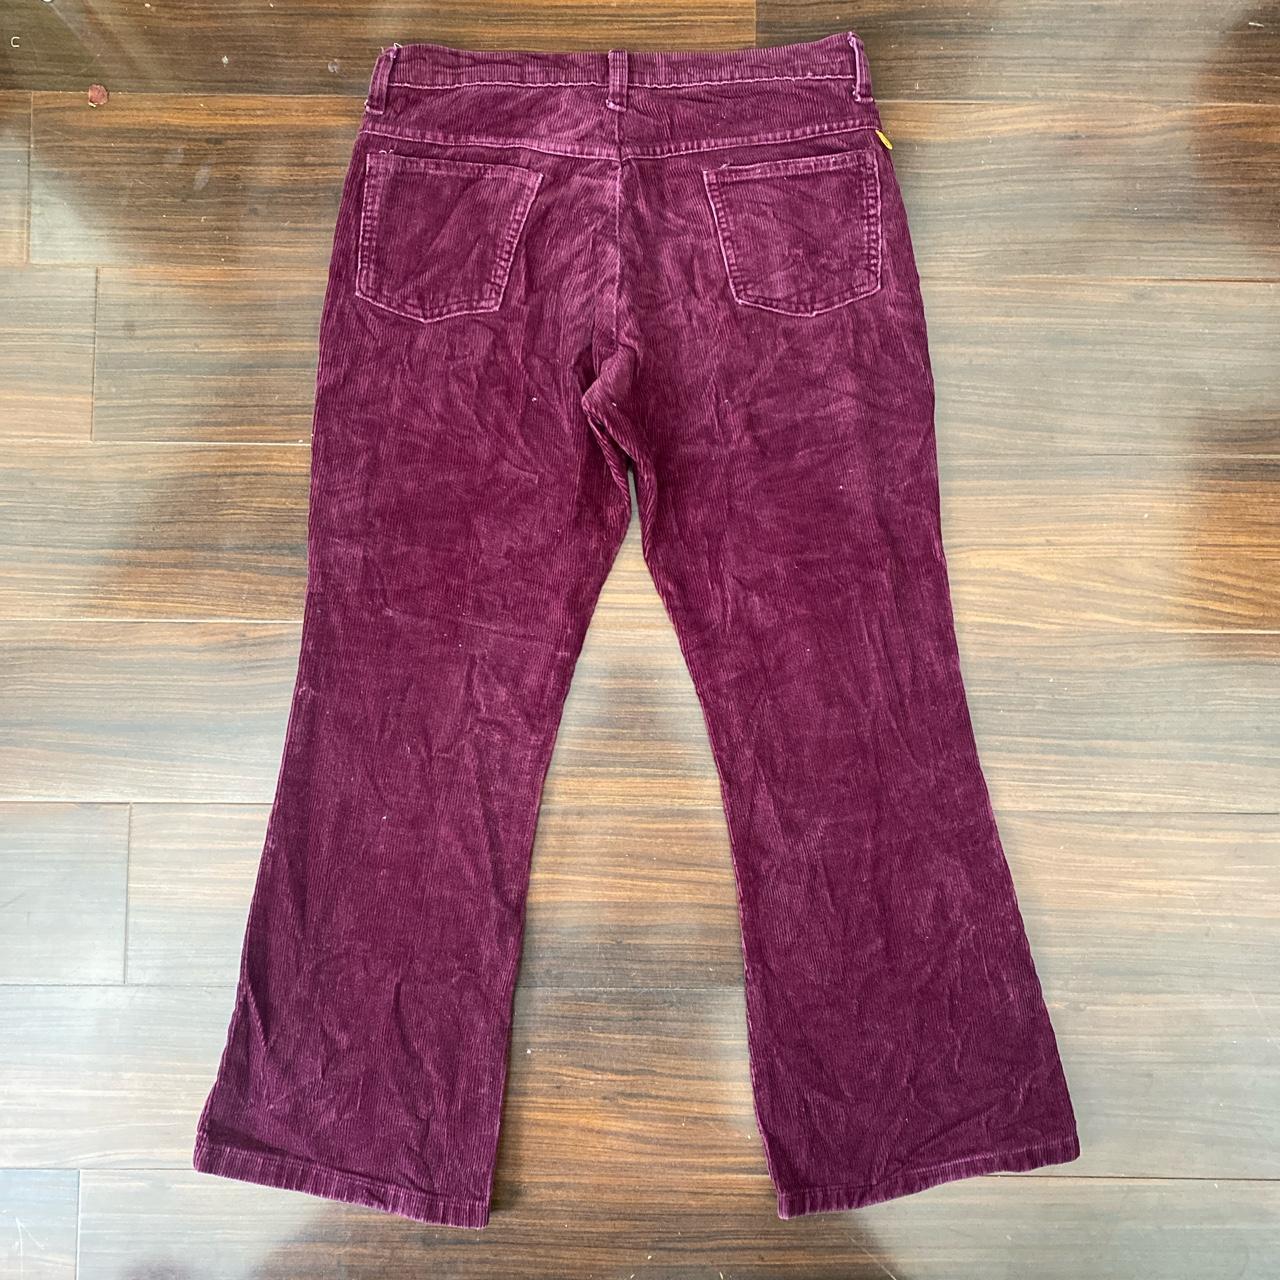 Farah Women's Burgundy and Gold Trousers (2)